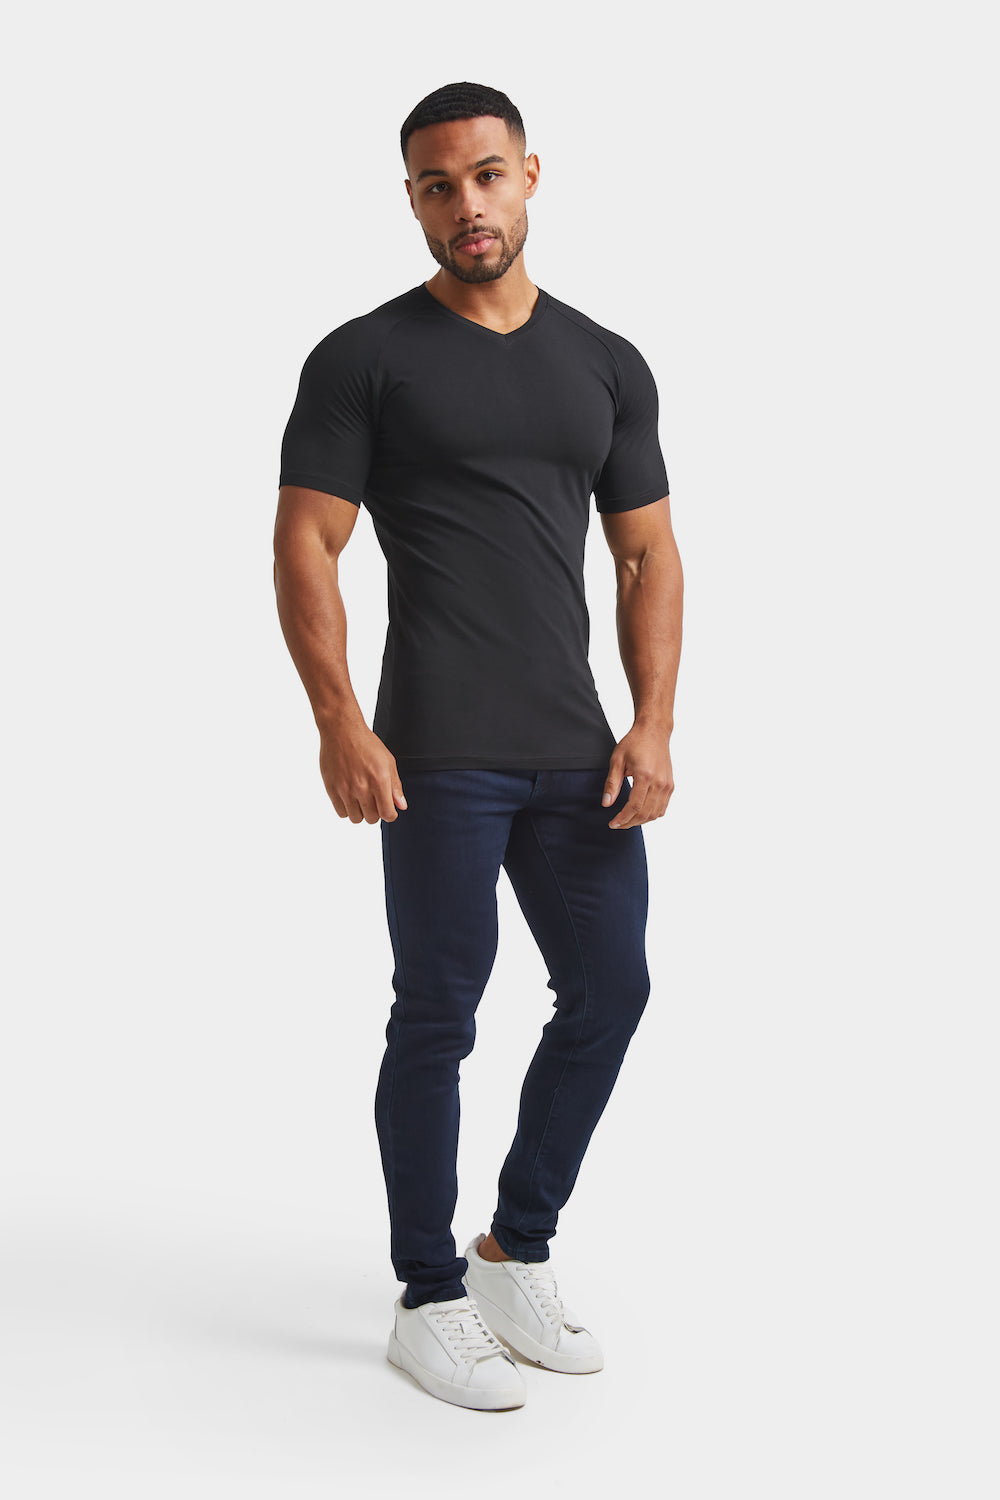 Athletic Fit Pants in Black - TAILORED ATHLETE - USA